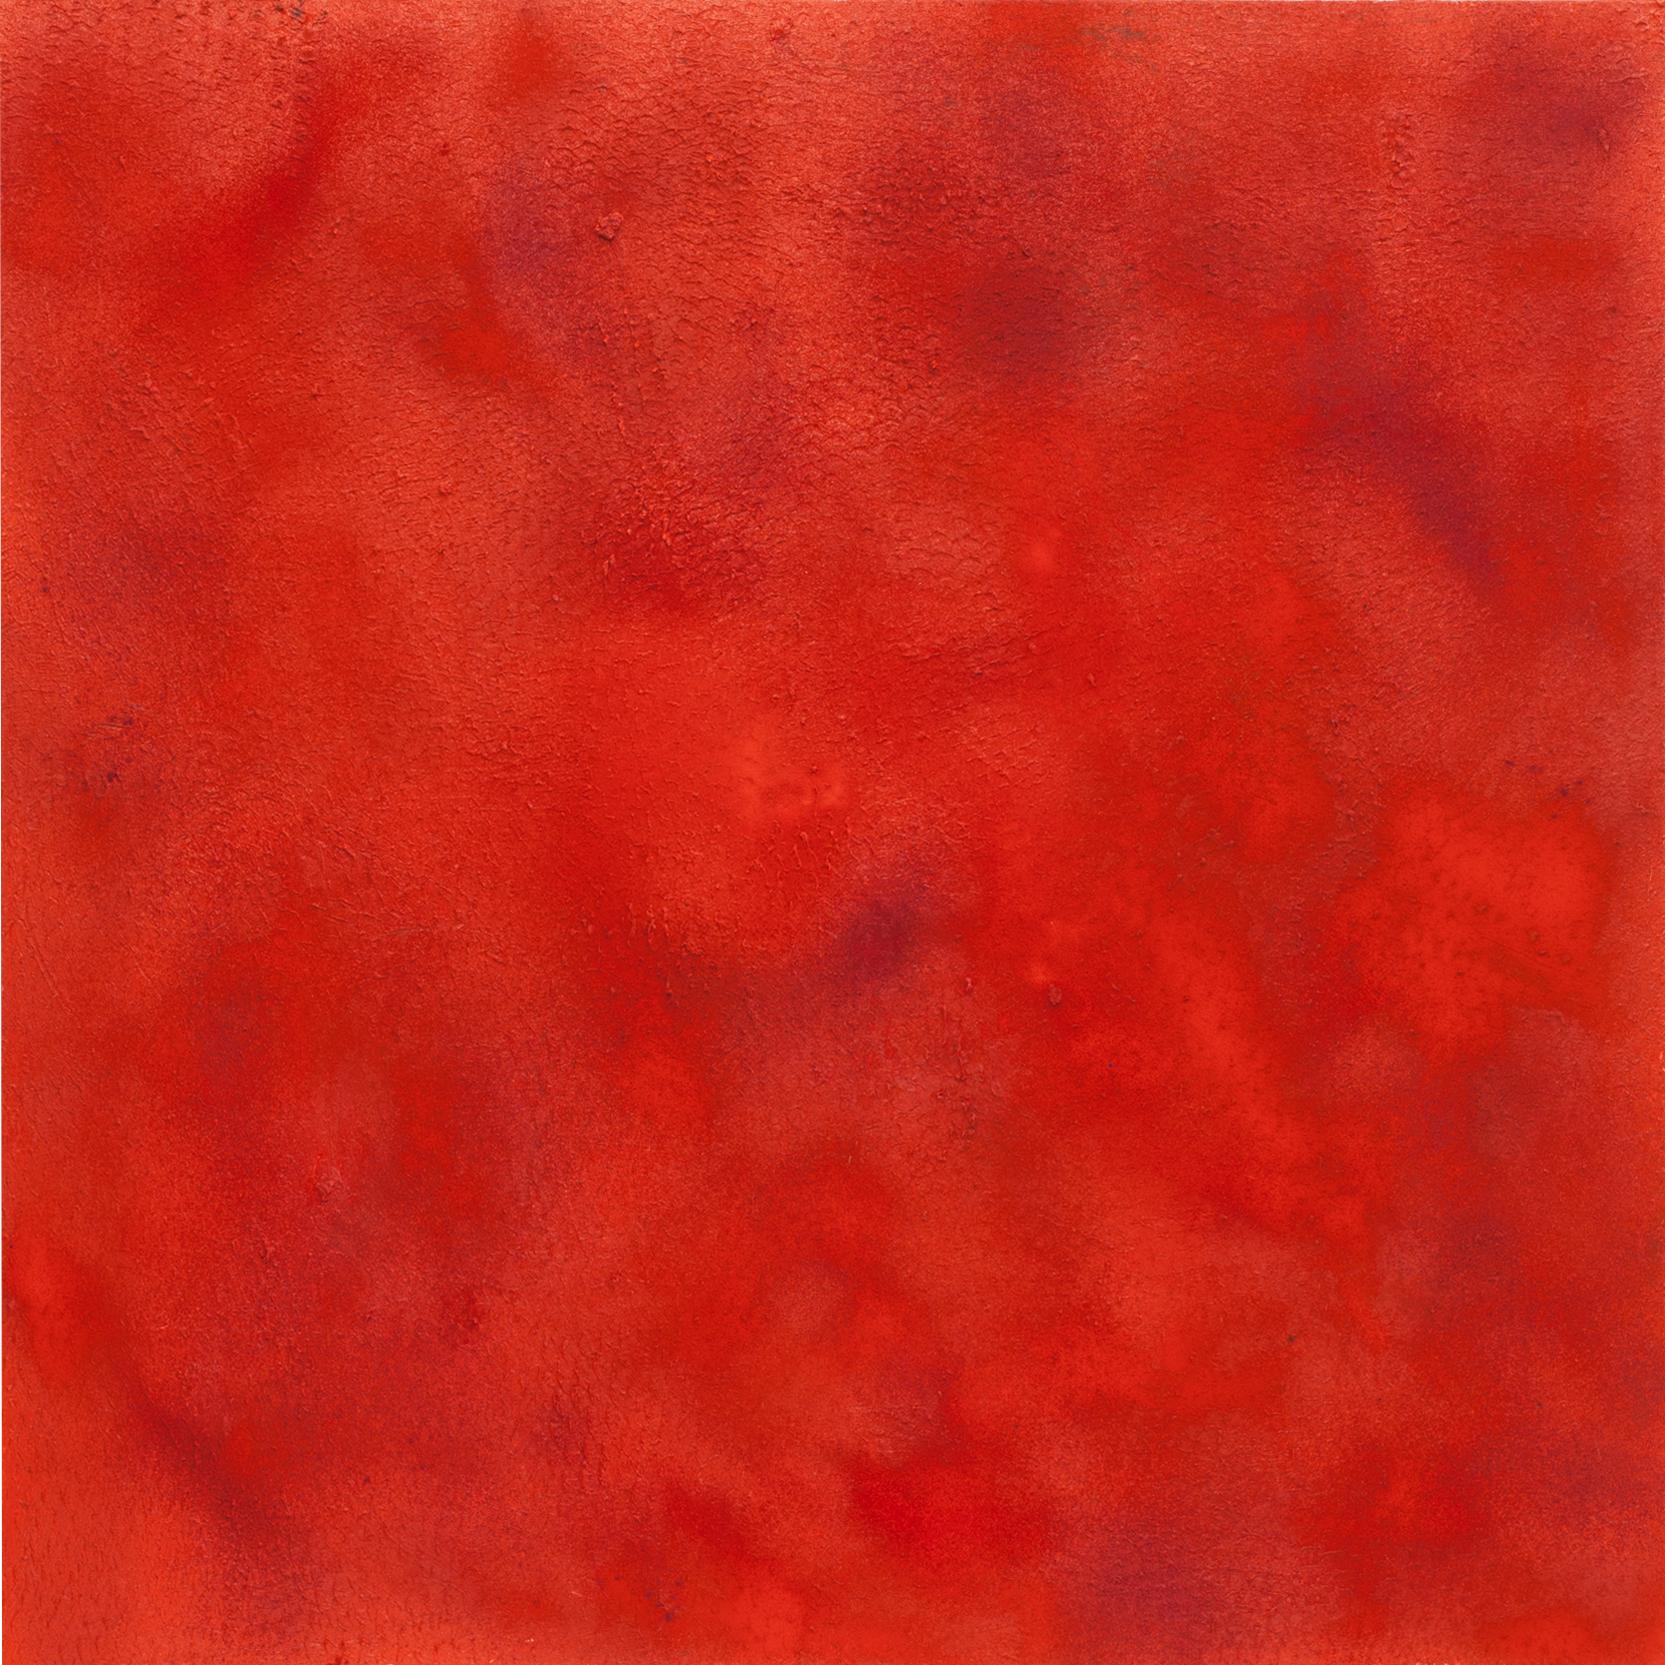 Red II, Expanded Metal Pigment Painting